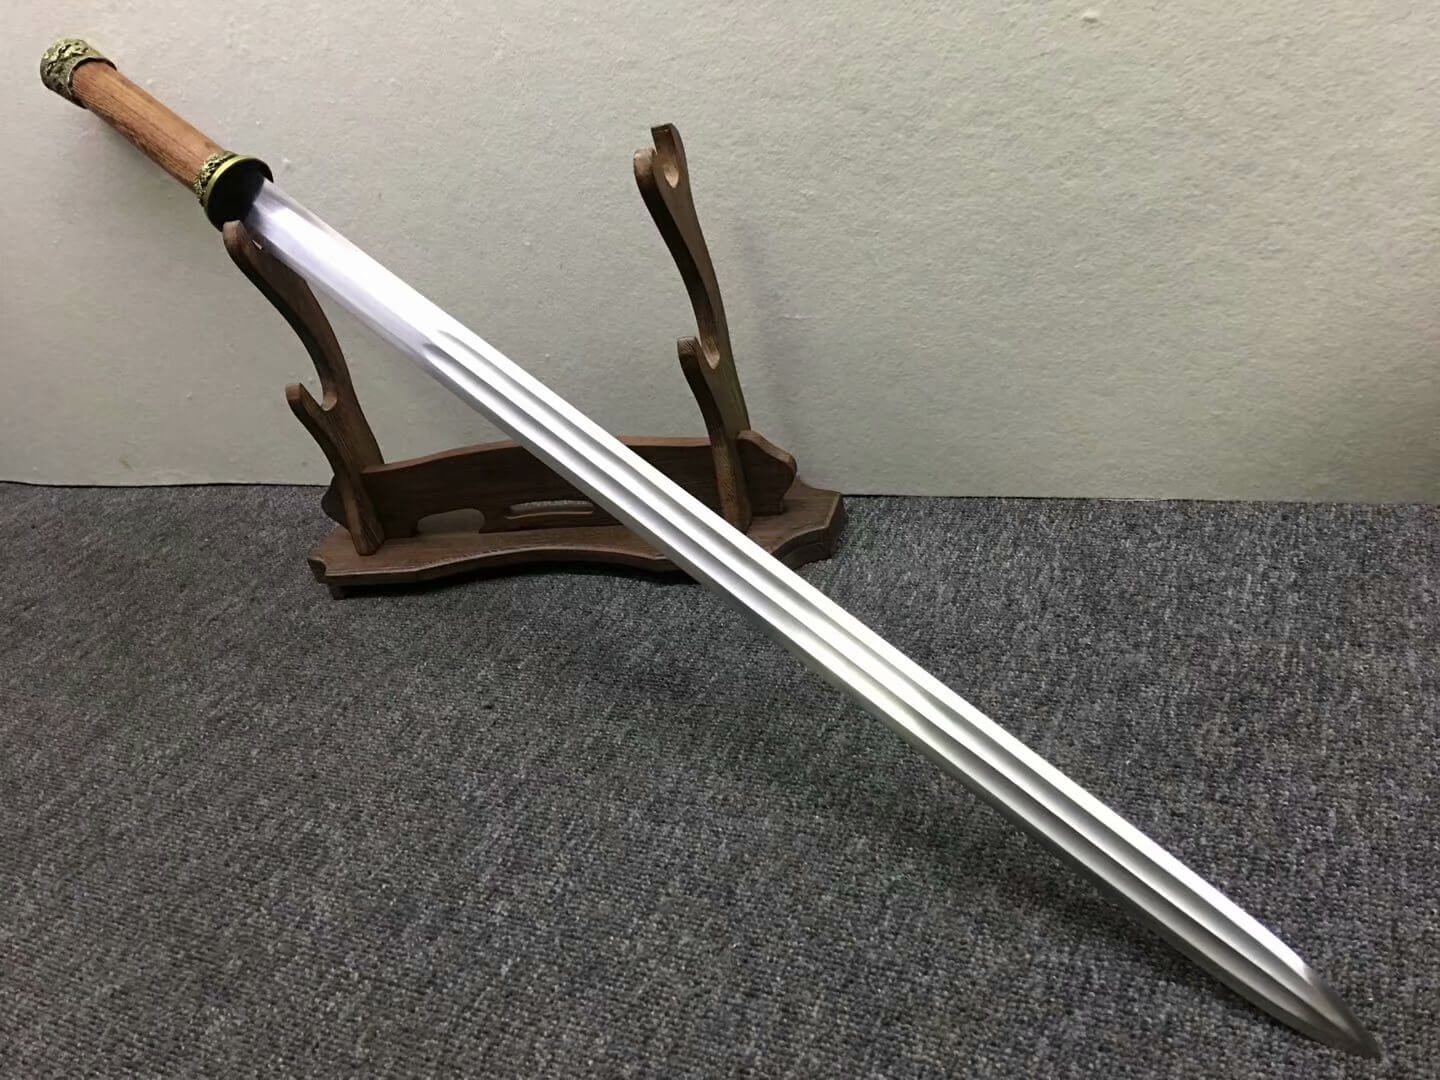 Longquan sword,High carbon steel etch blade,Rosewood,Alloy fittings - Chinese sword shop